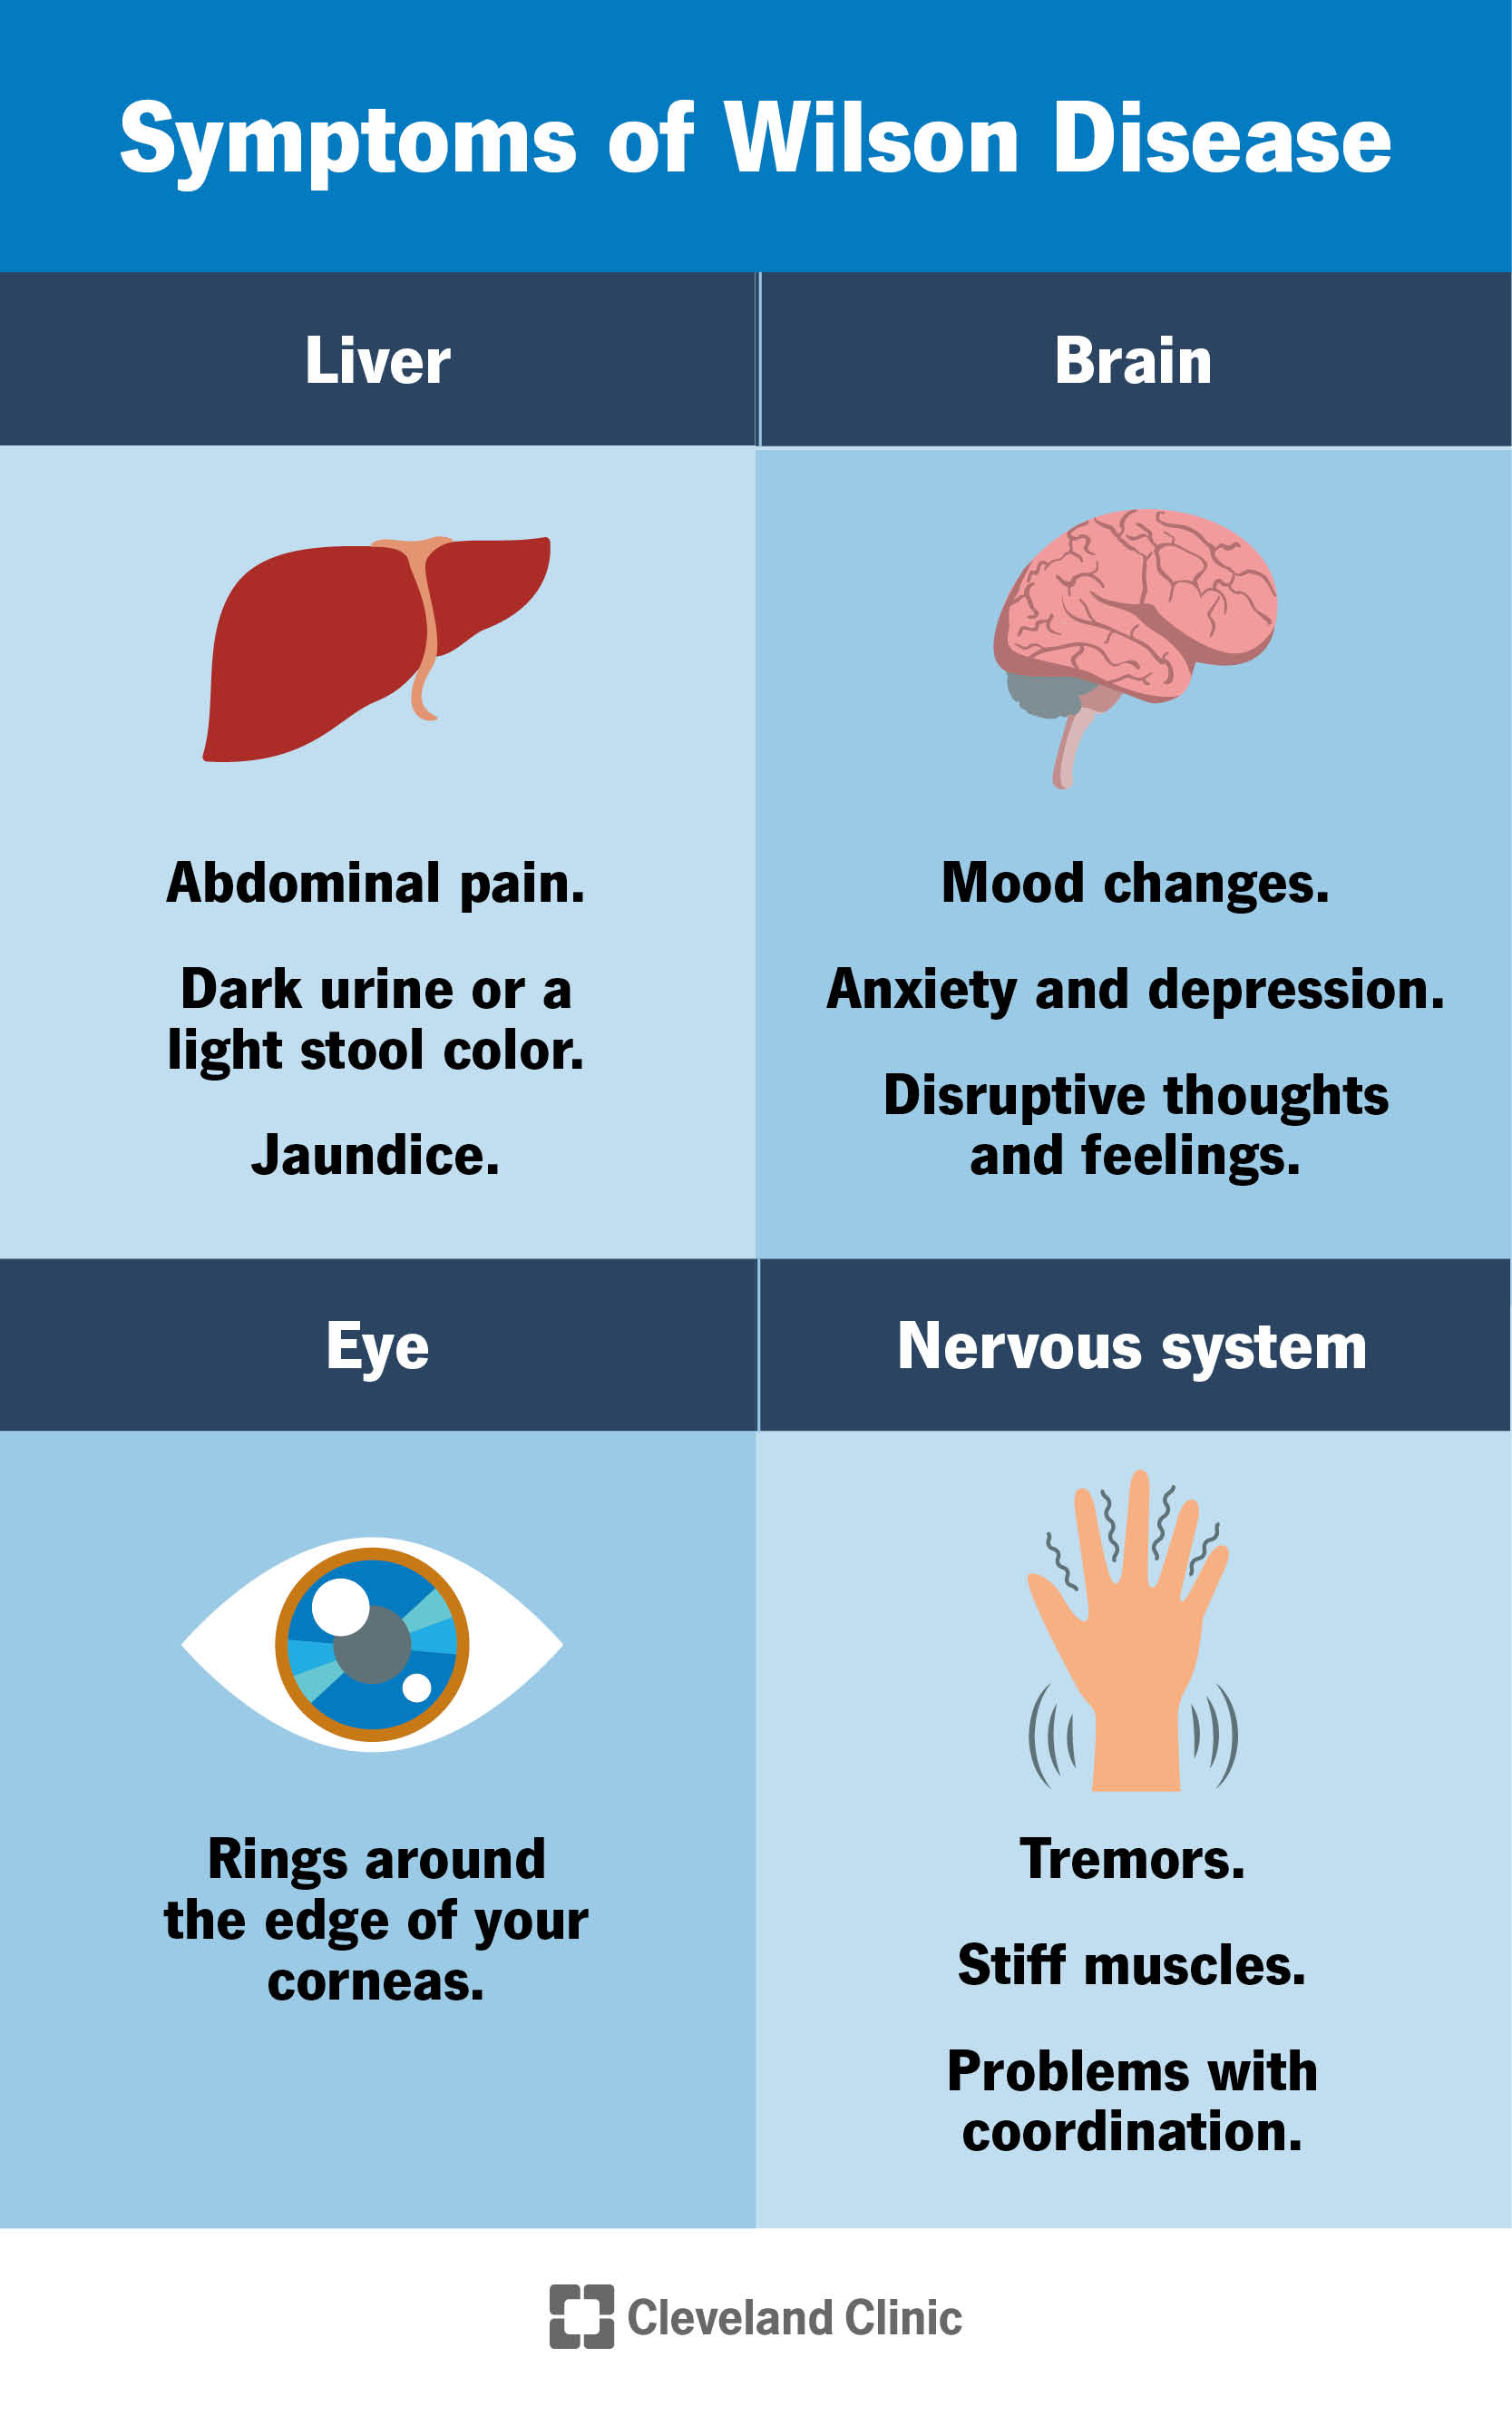 Symptoms of Wilson disease affect your liver, brain, eyes and nervous system.